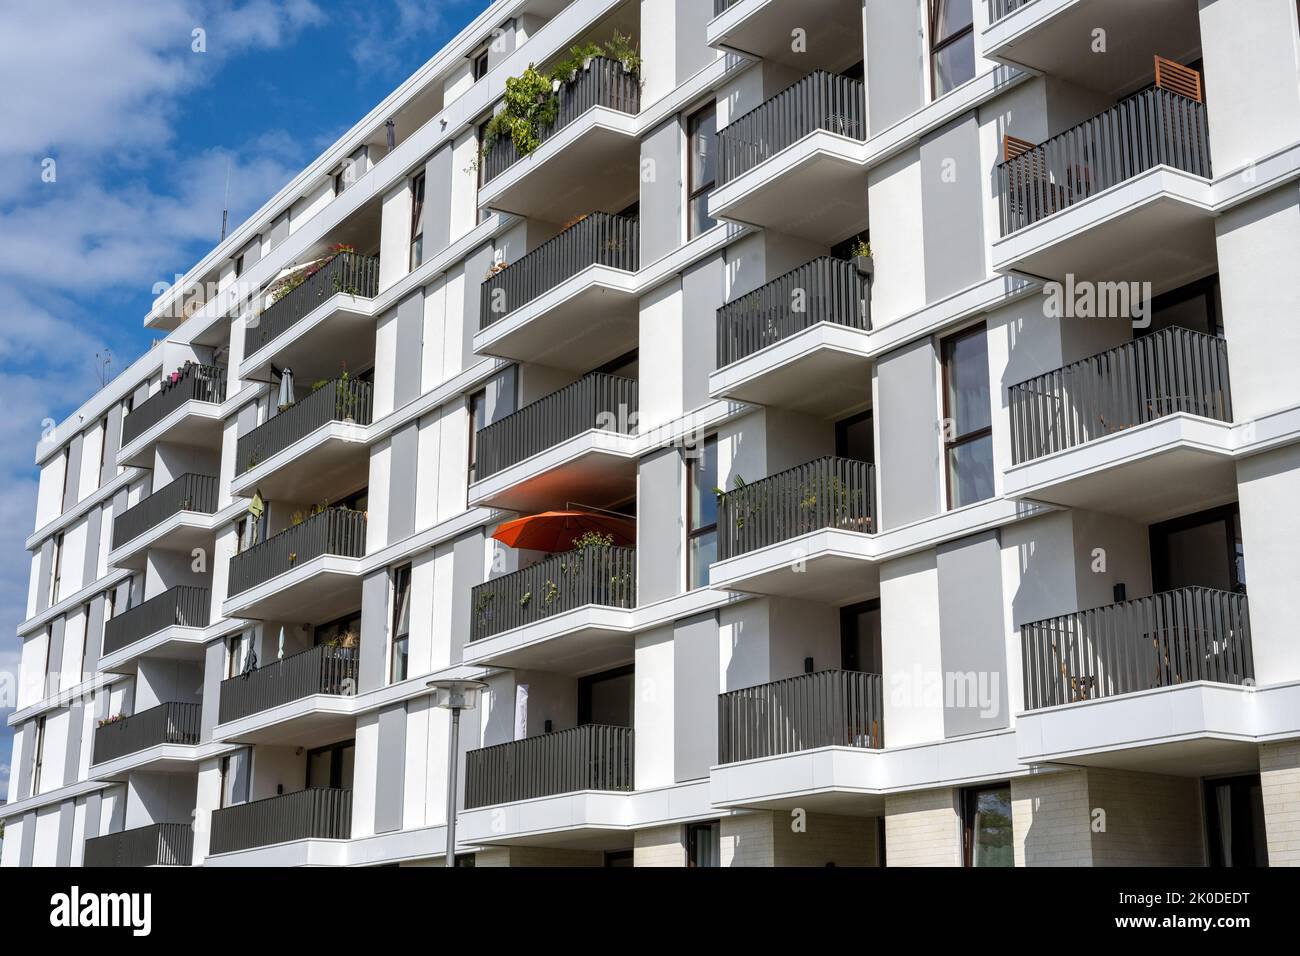 The facade of a modern apartment building seen in Berlin, Germany Stock Photo